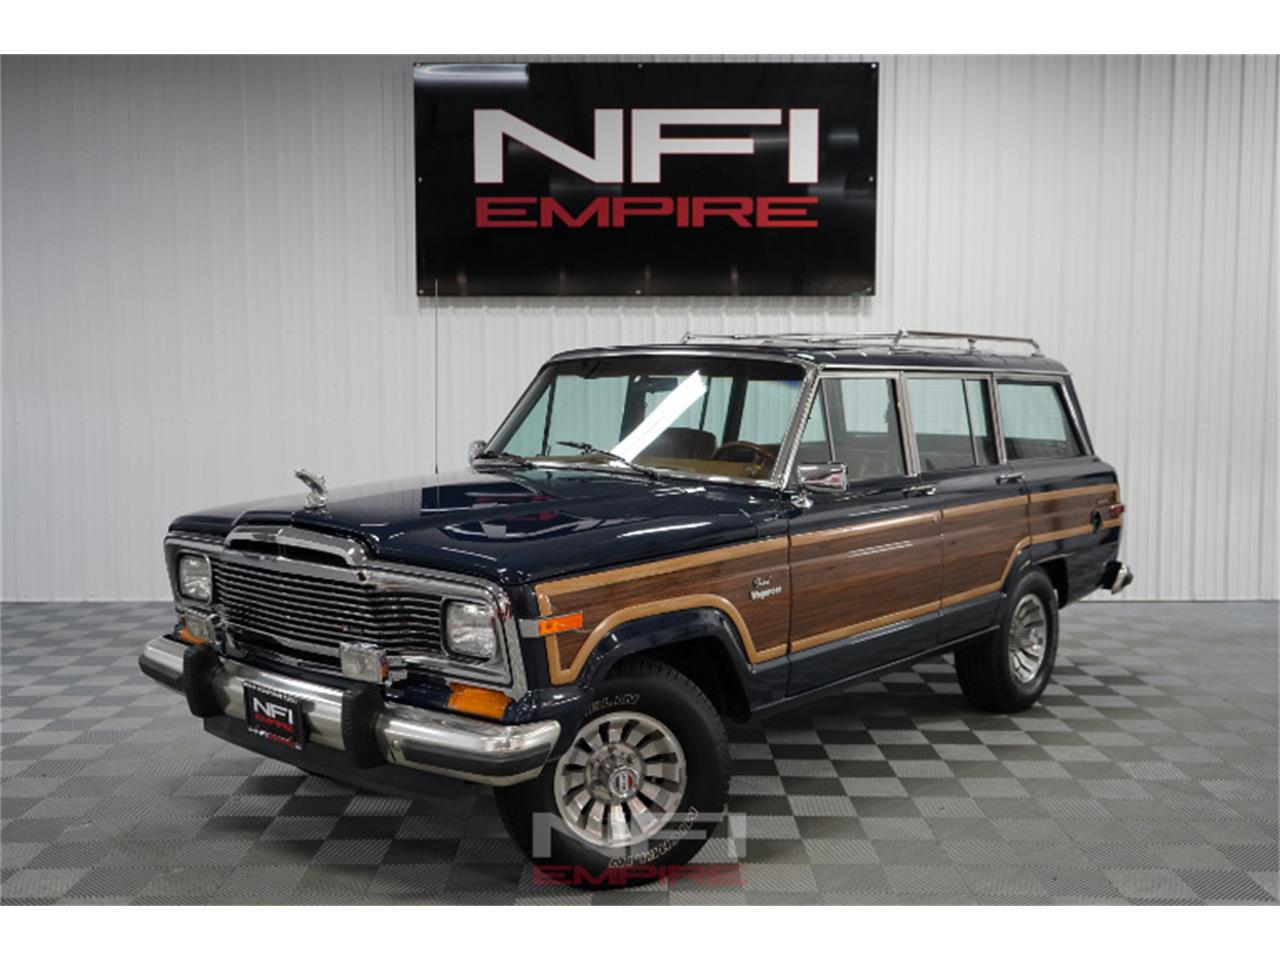 For Sale: 1984 Jeep Grand Wagoneer in North East, Pennsylvania for sale in North East, PA